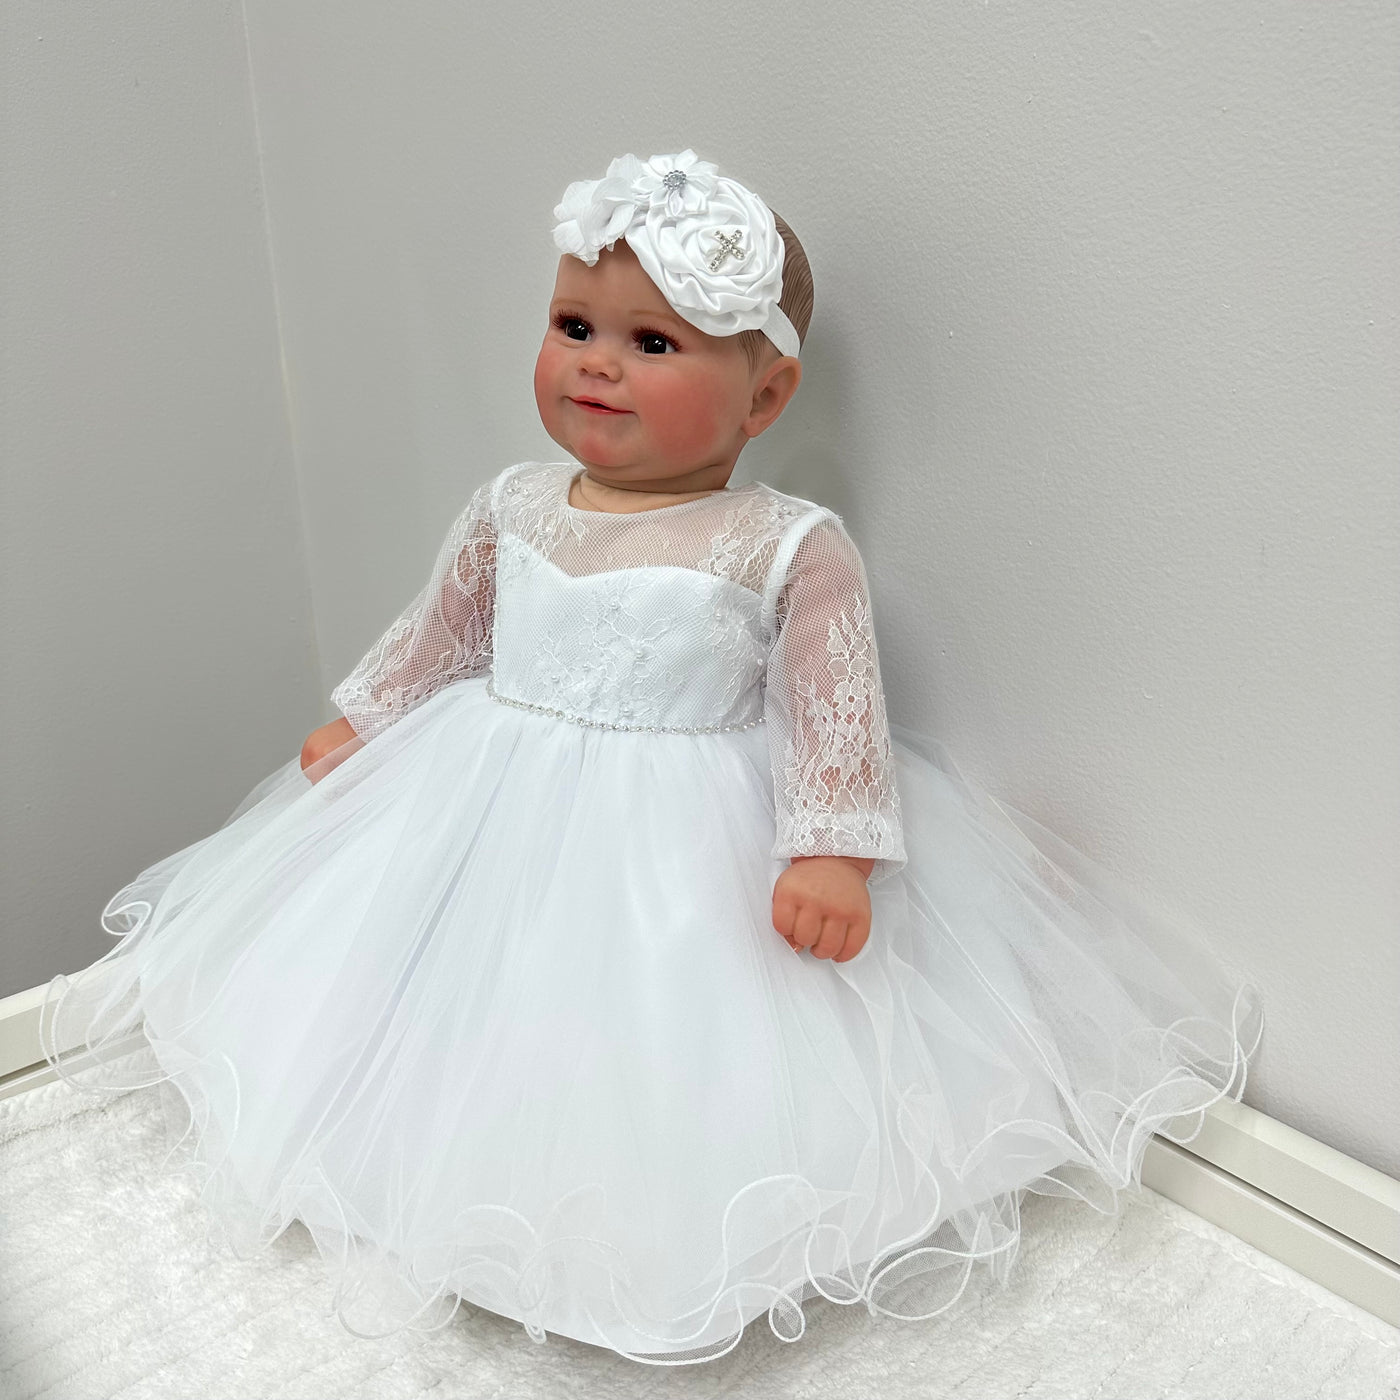 Jessica Baby Dress with Lace Sleeves: WHITE